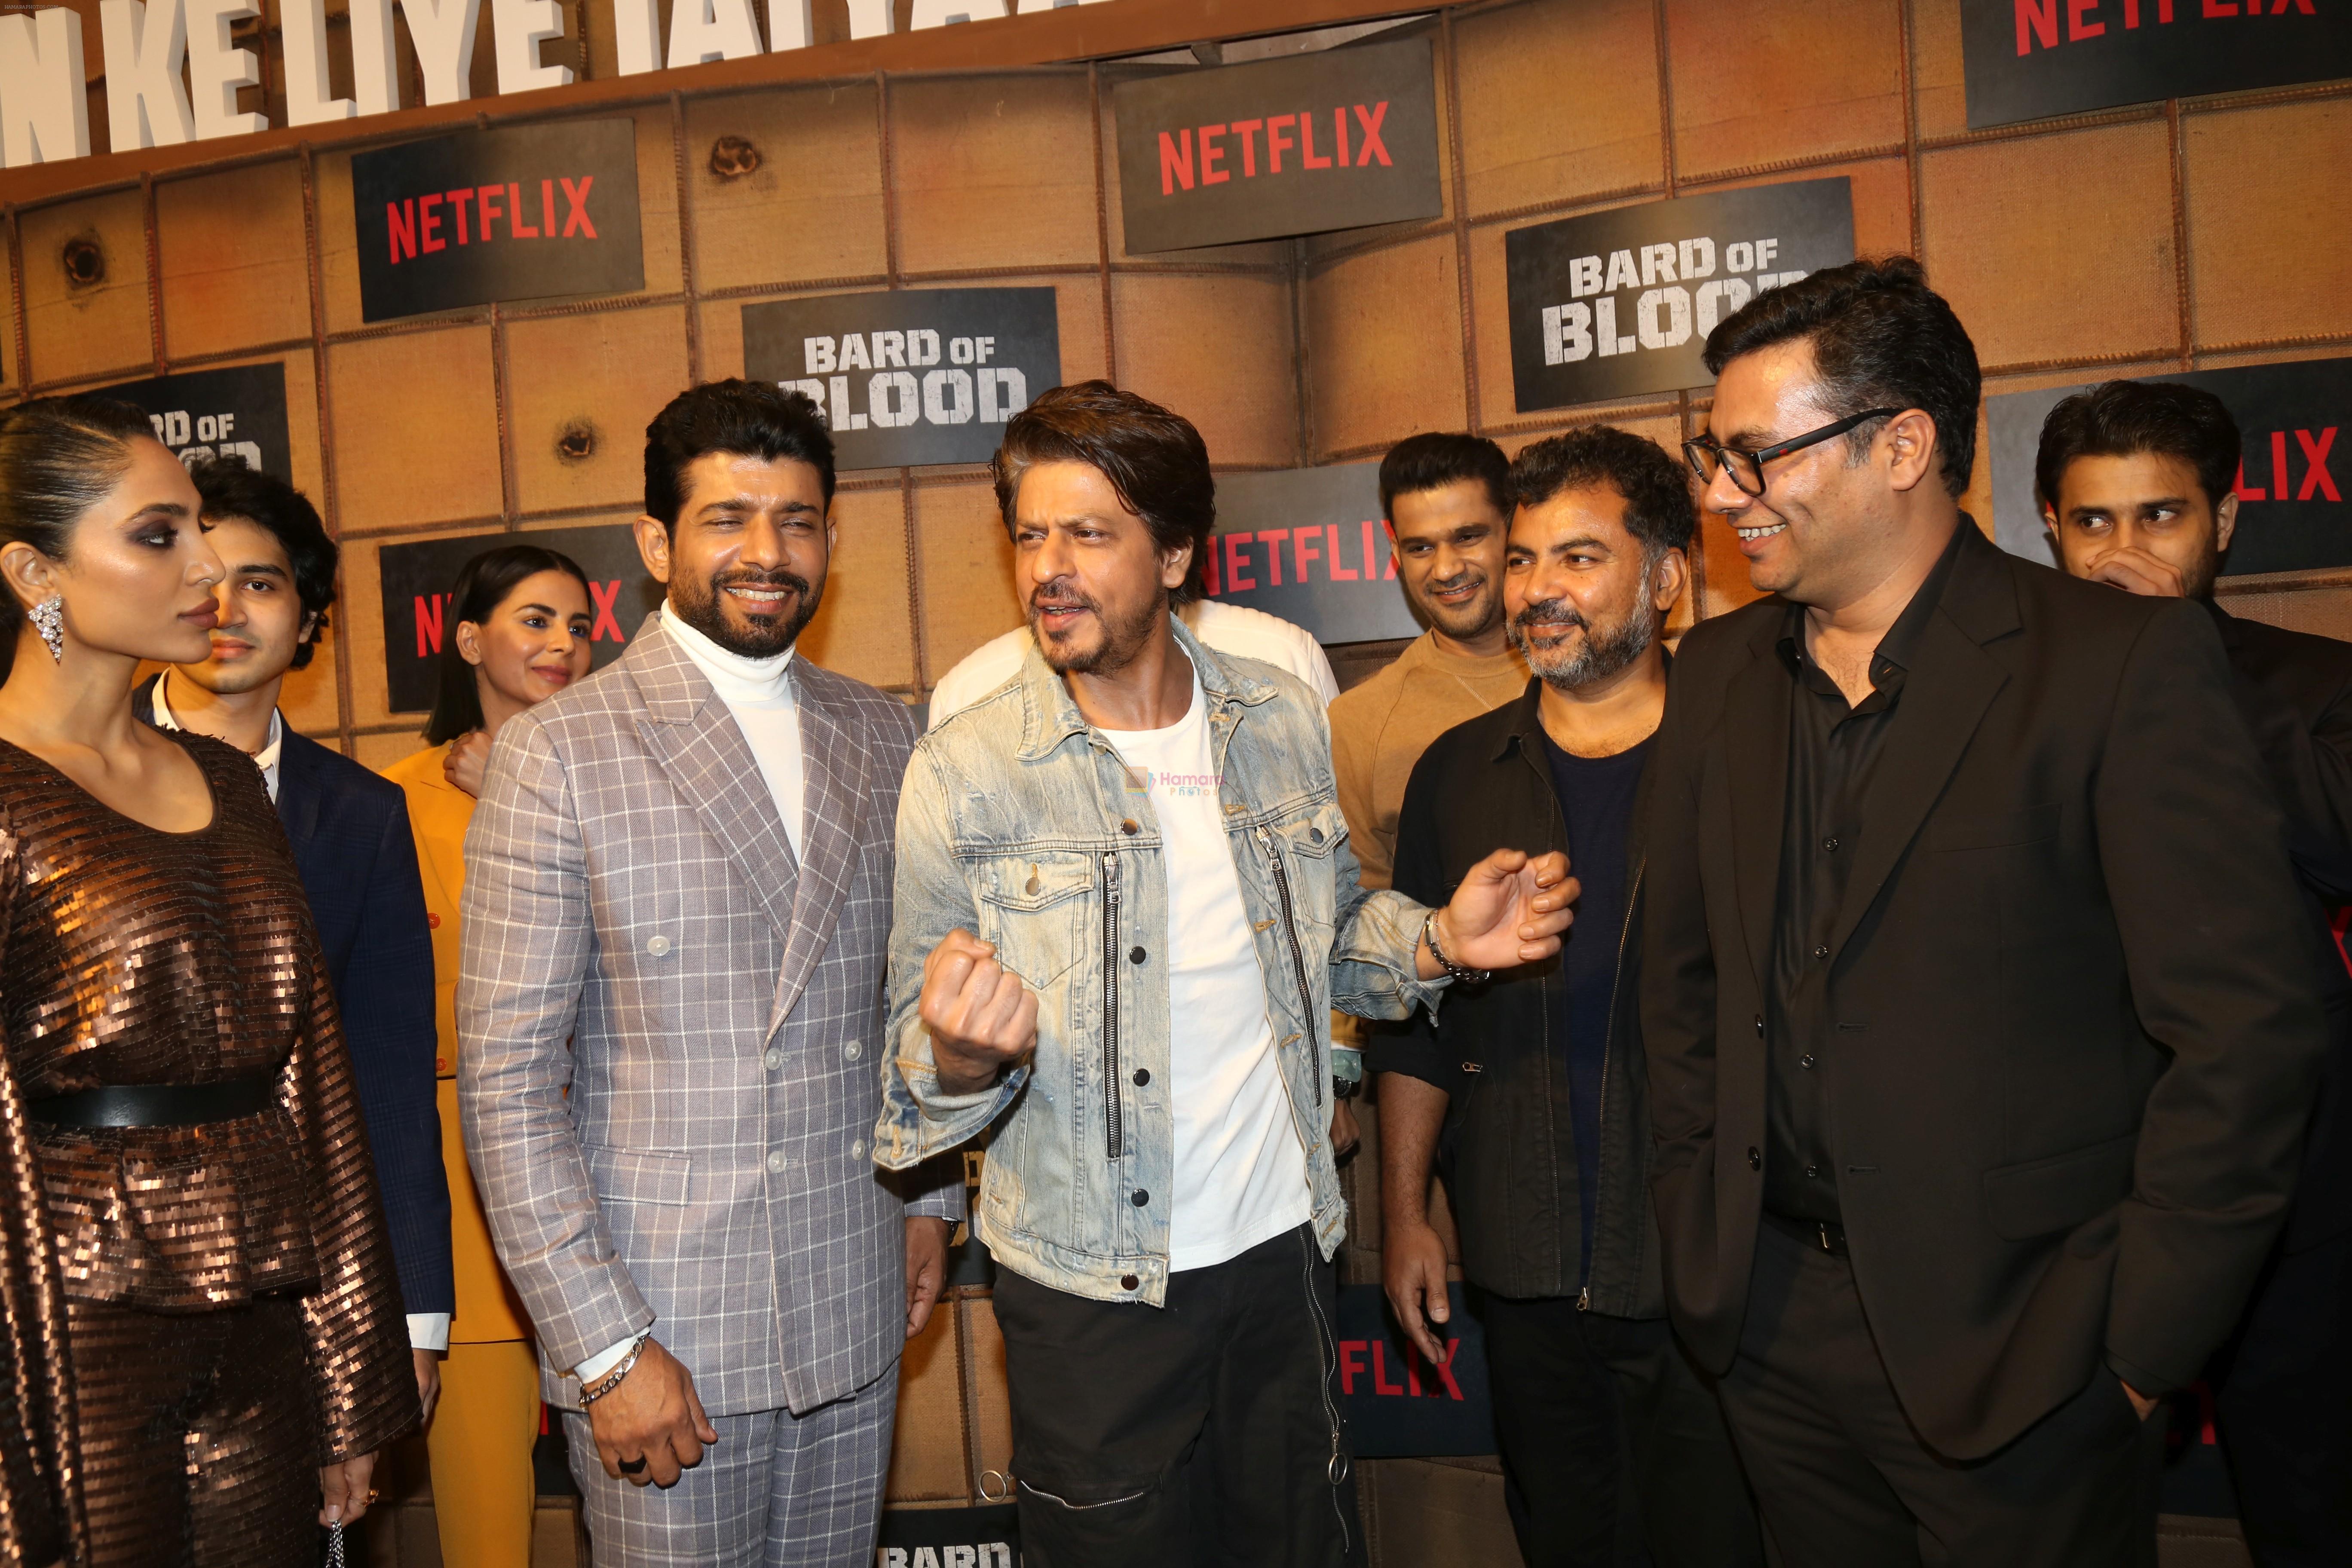 Shah Rukh Khan at the screening Netflix Bard of Blood in pvr Phoenix lower parel on 24th Sept 2019